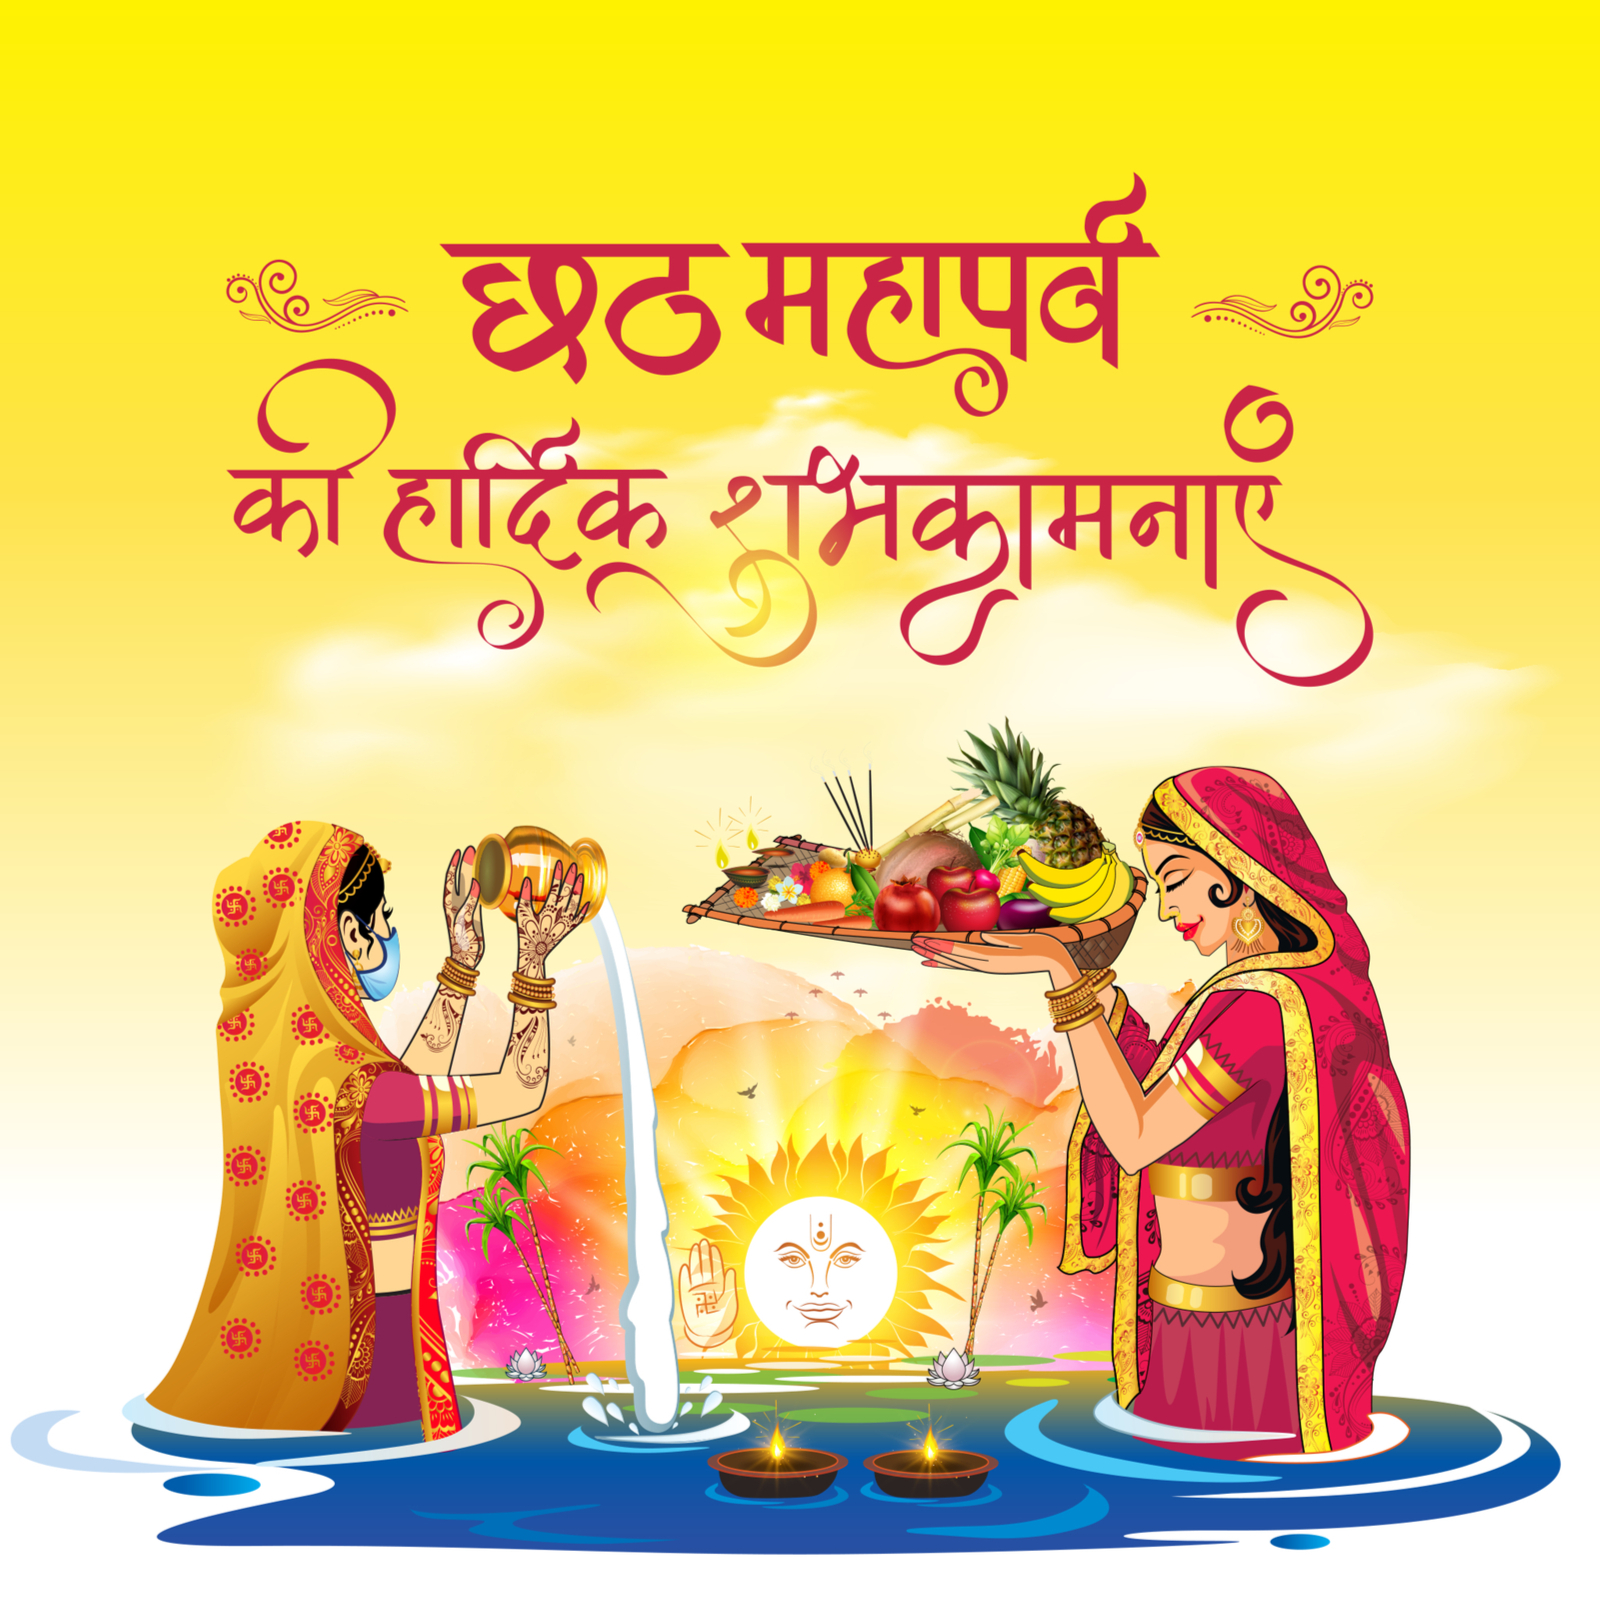 Happy Chhath Puja Image Wishes Quotes Messages And